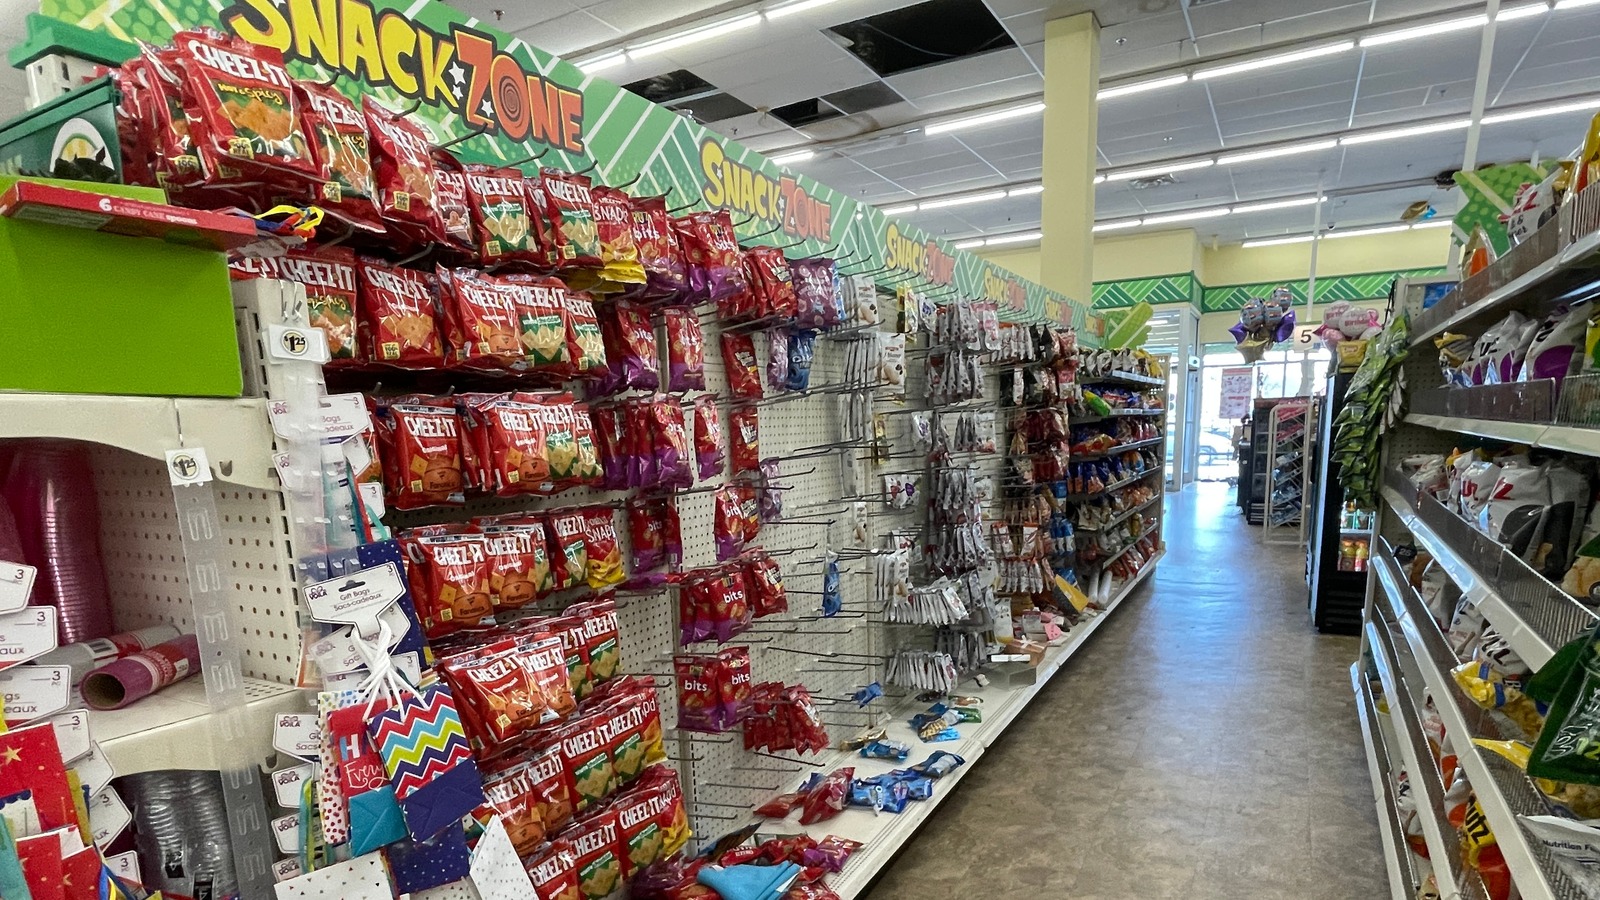 https://www.mashed.com/img/gallery/i-ate-nothing-but-dollar-tree-food-for-3-days/l-intro-1678891436.jpg